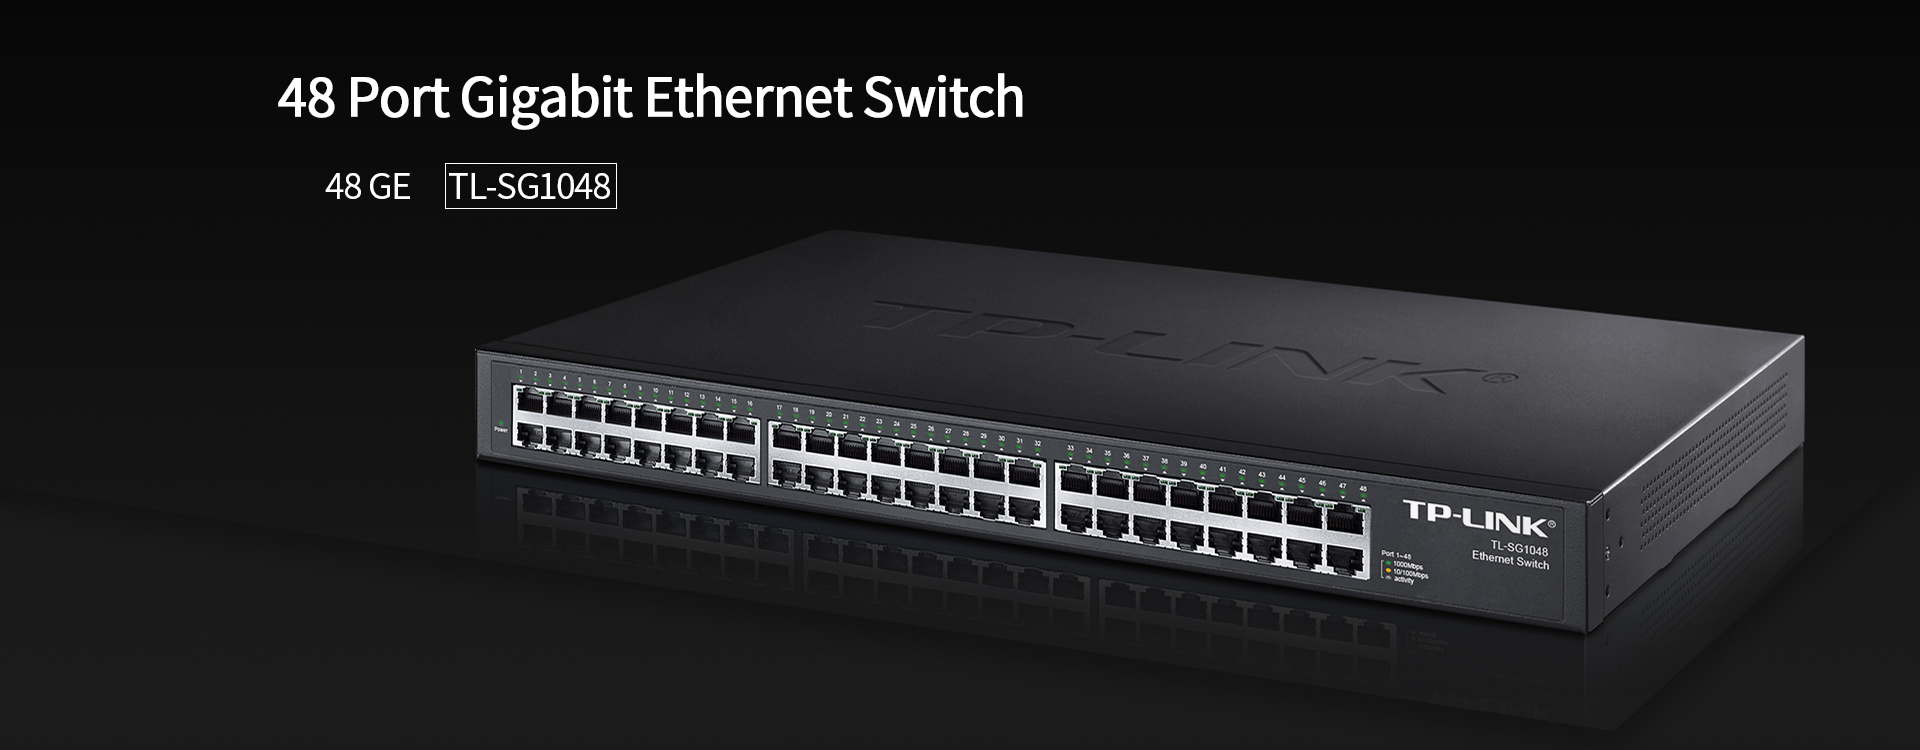 TP-Link TL-SE1005M Cheapest of the Cheap 5-port 2.5GbE Switch Review